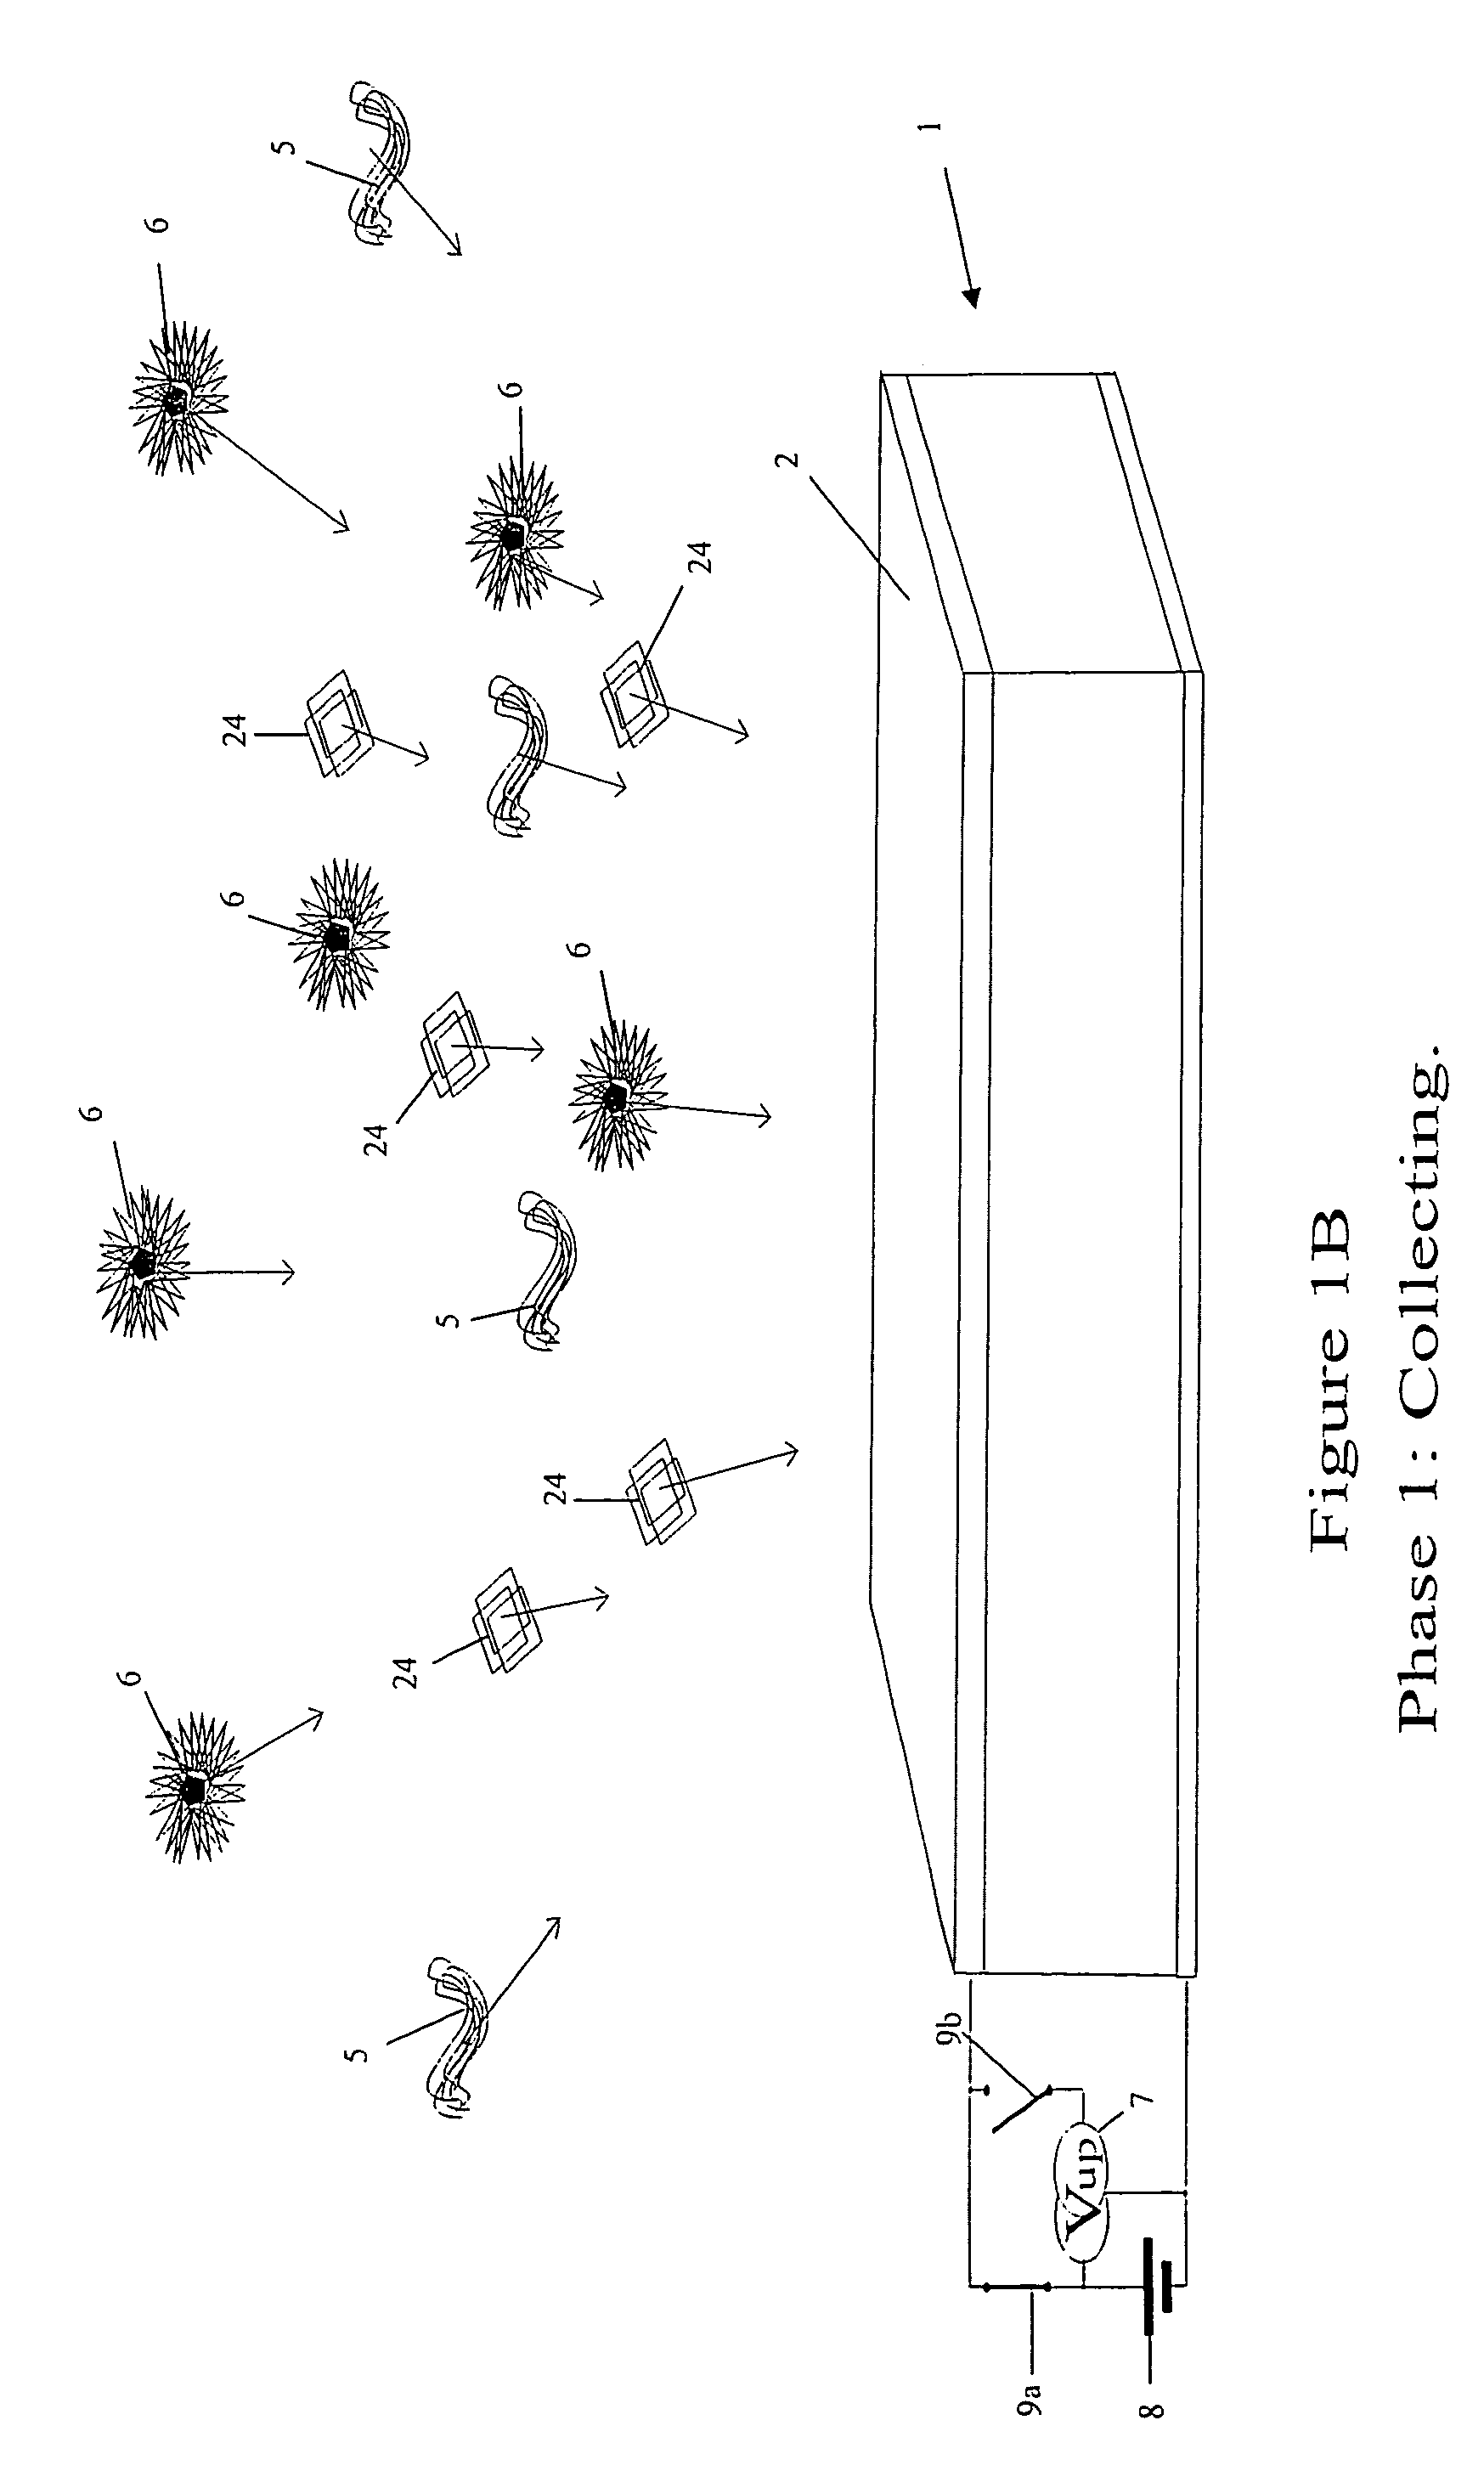 Methodology and apparatus for the detection of biological substances